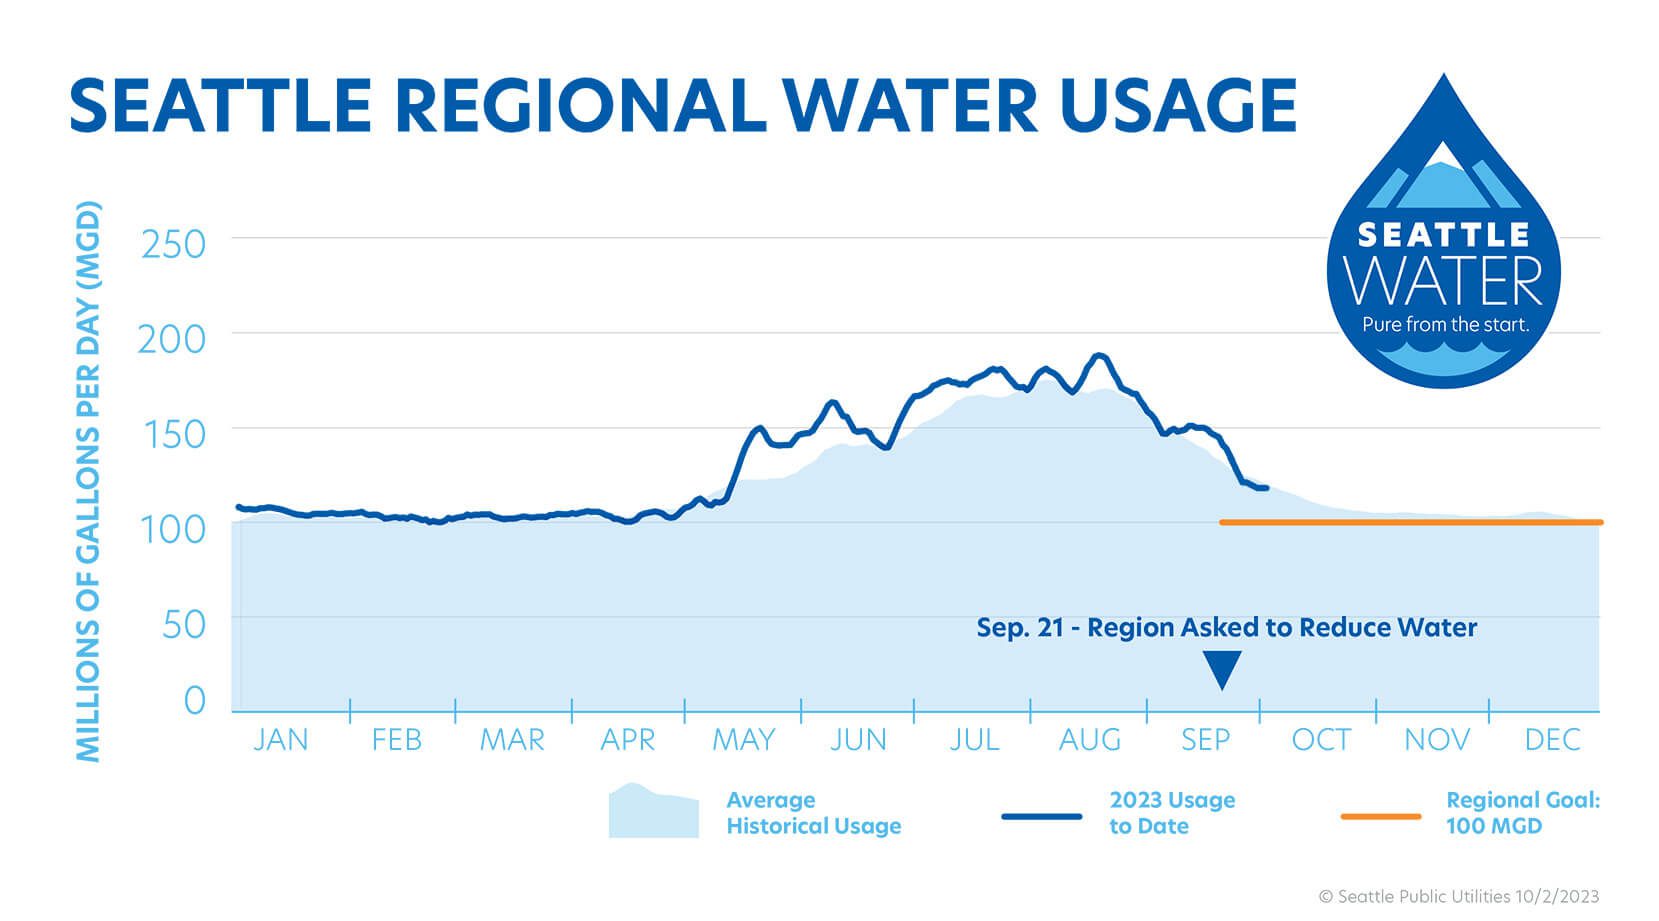 Graph showing the water usage for the past calendar year showing that we are still above the target of 100 million gallons per day.